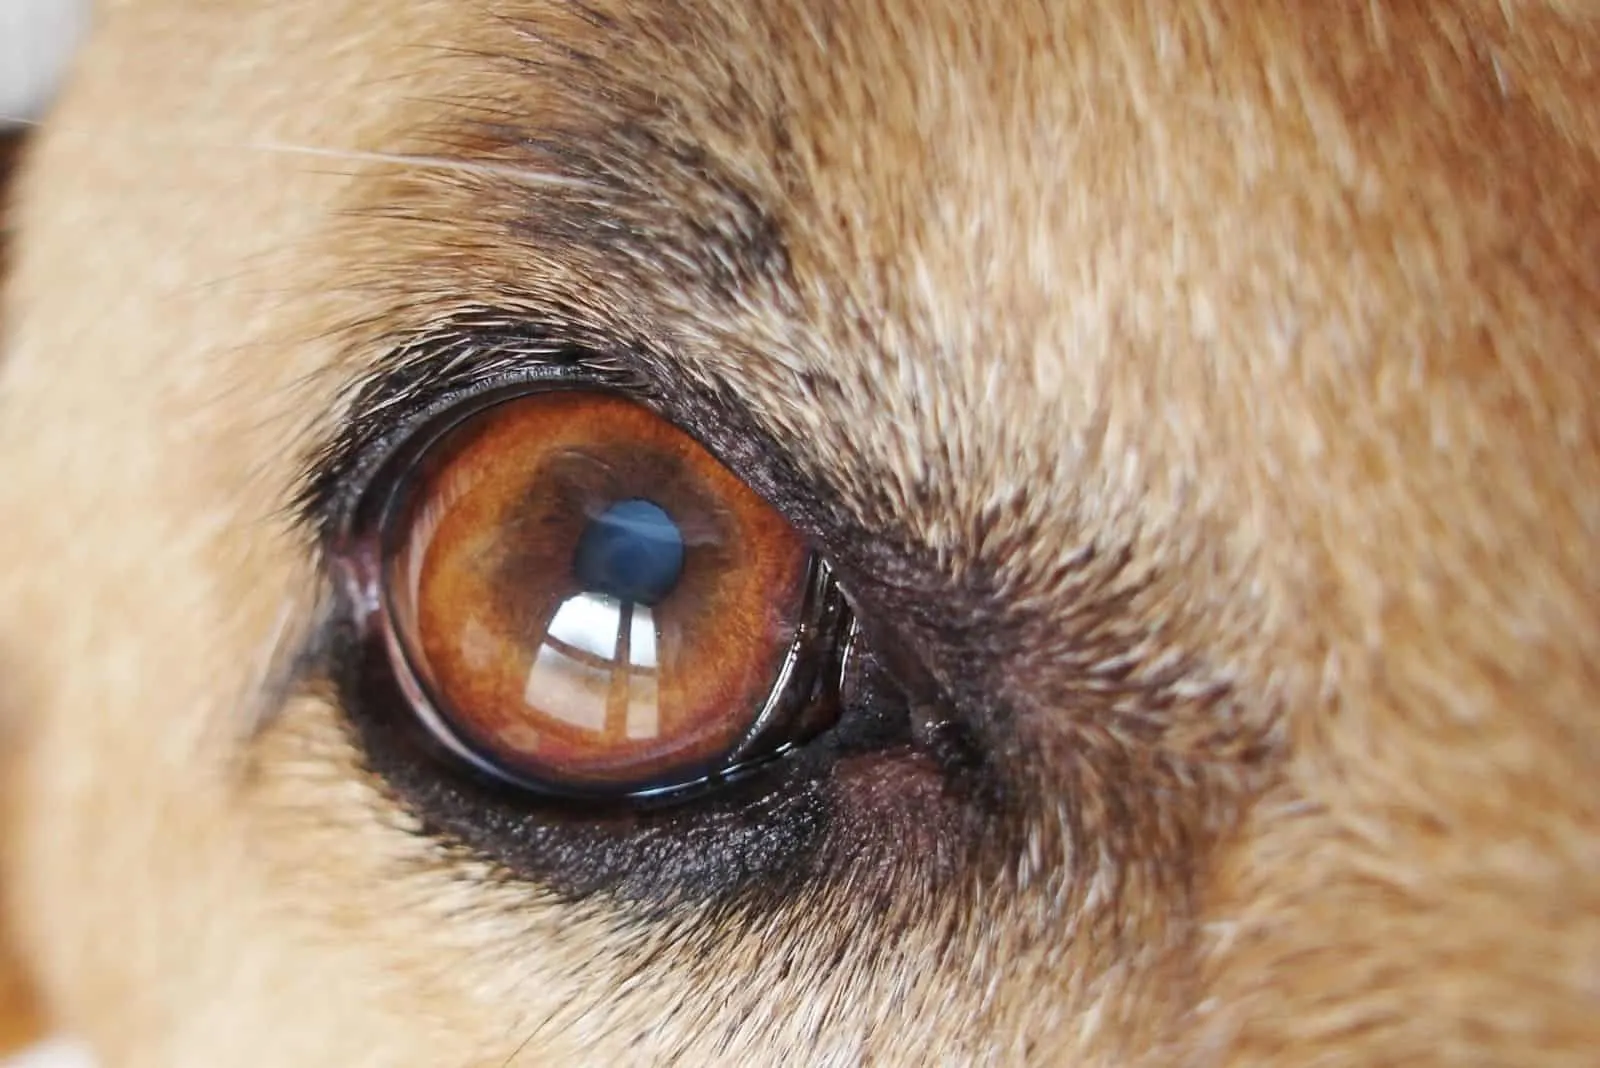 dogs eye with cataract on the lens of his eye in macro 